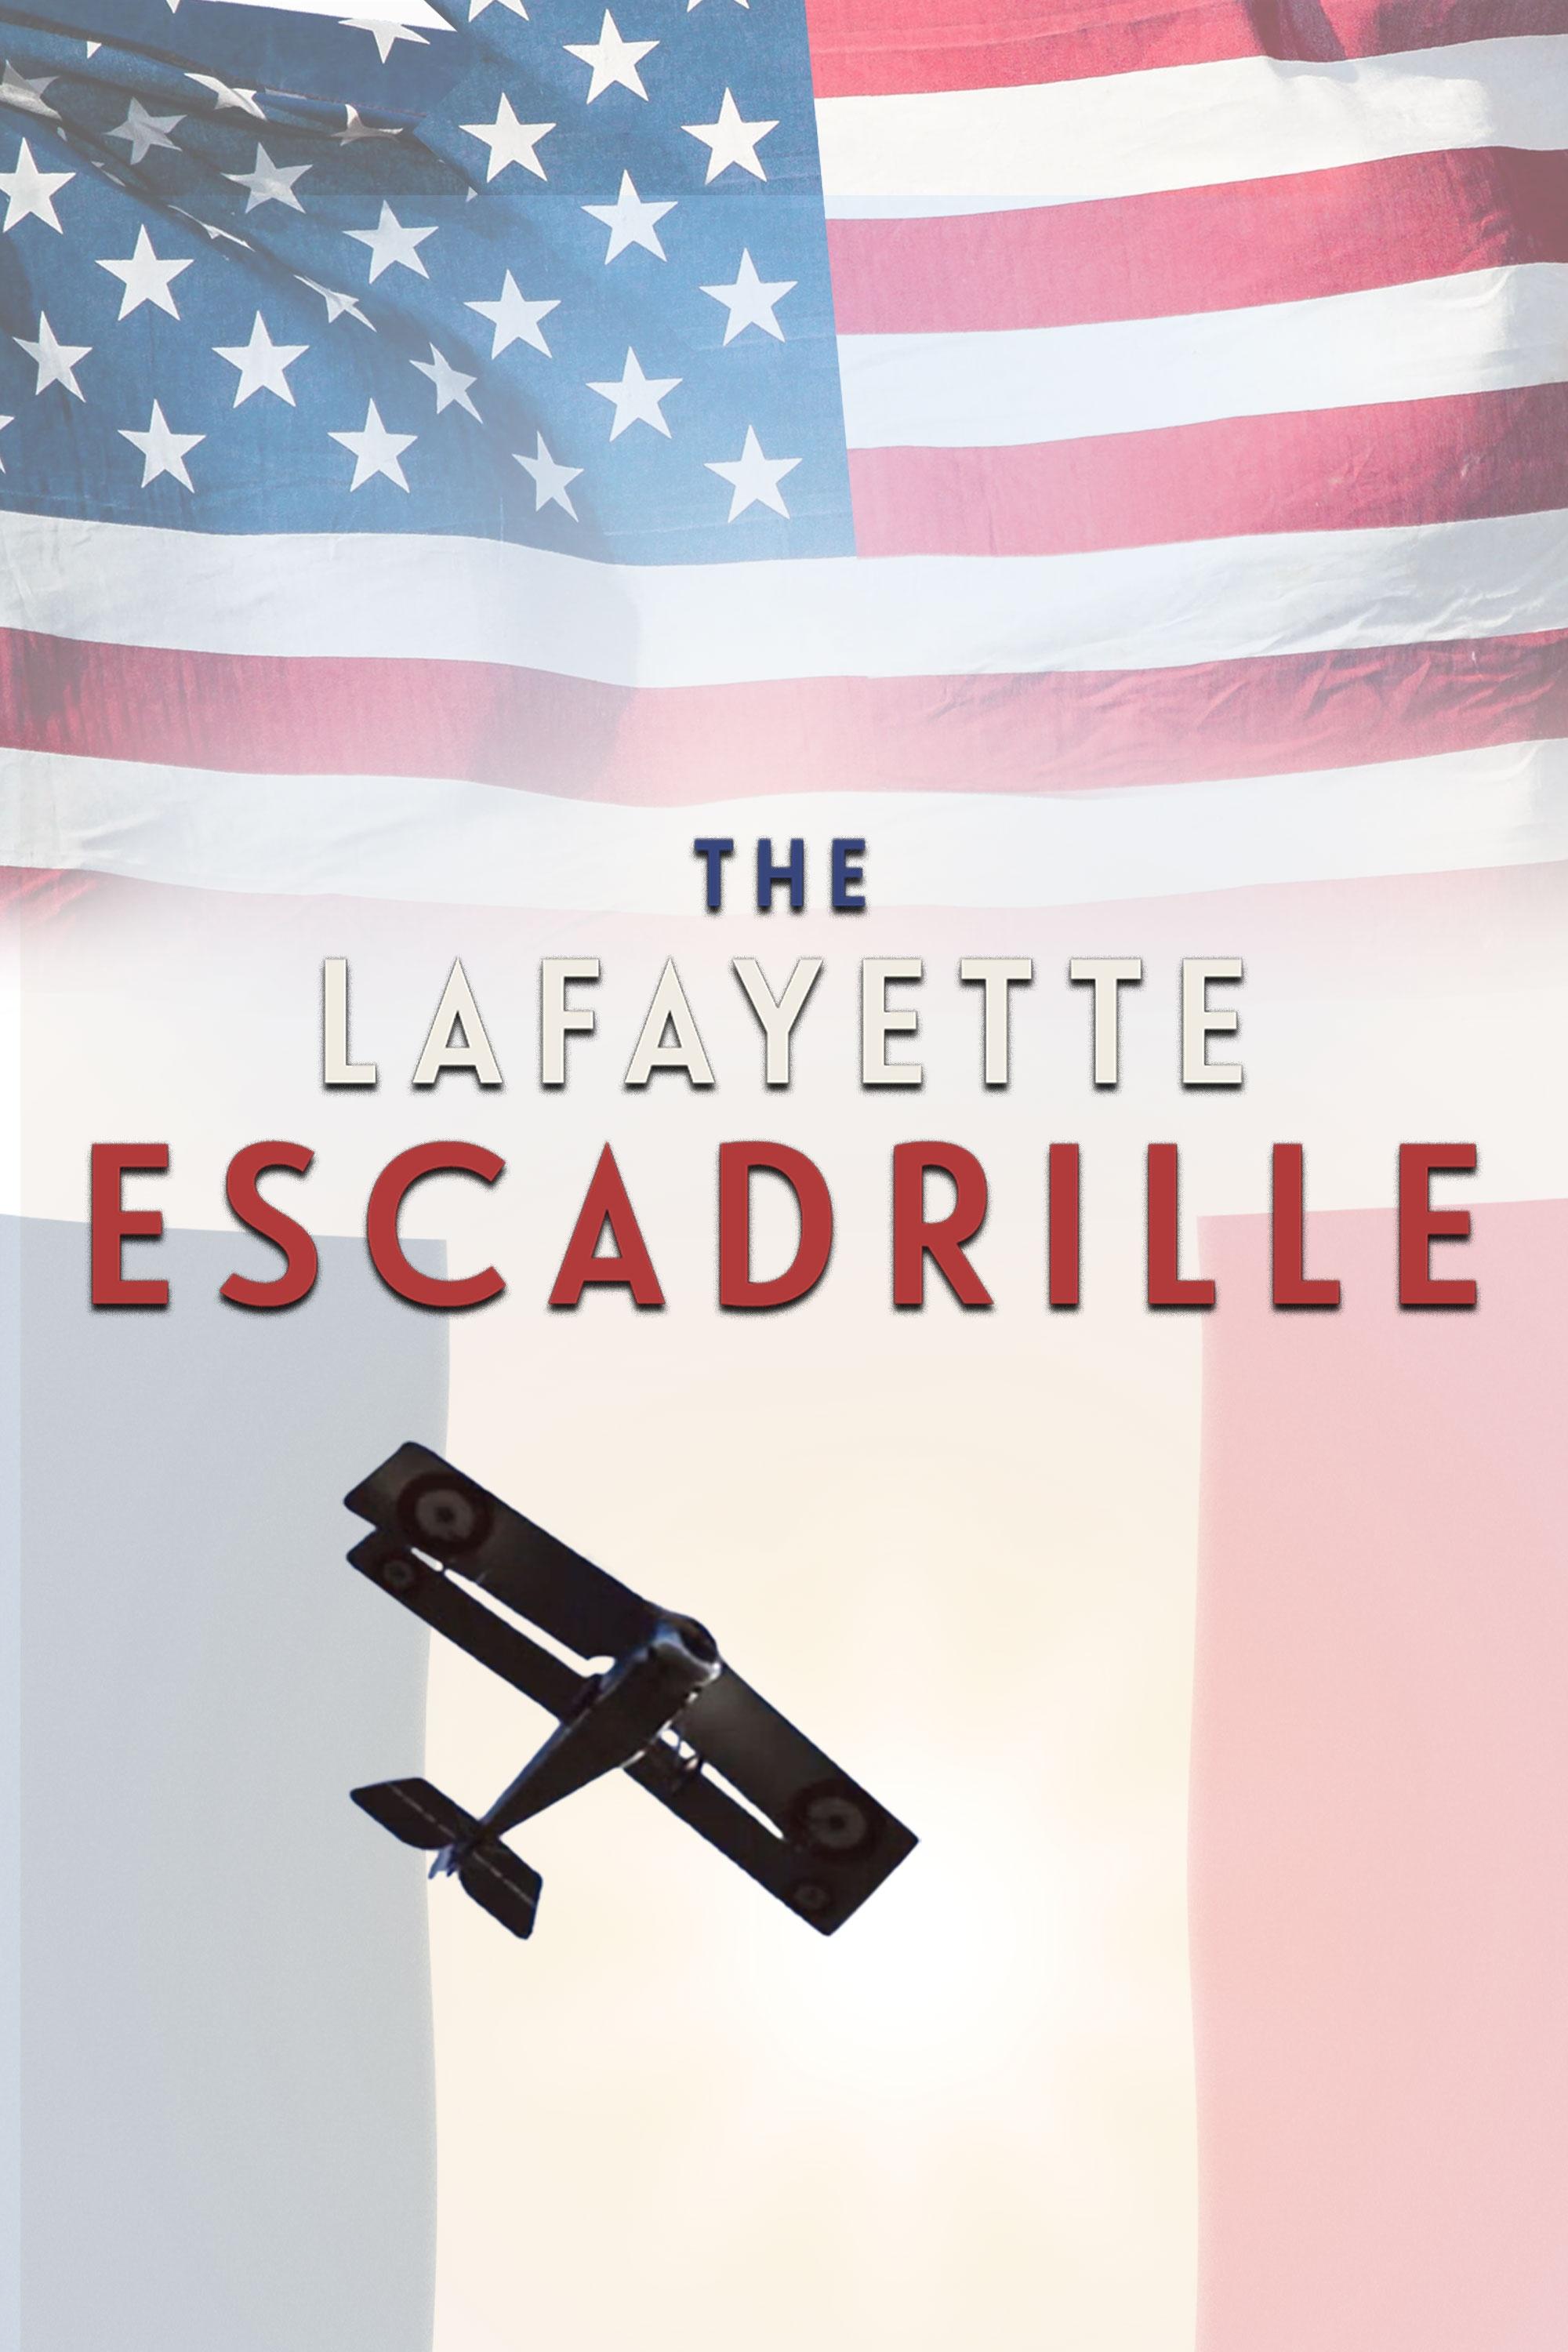 The Lafayette Escadrille: The American Volunteers Who Flew For France in World War One show's poster